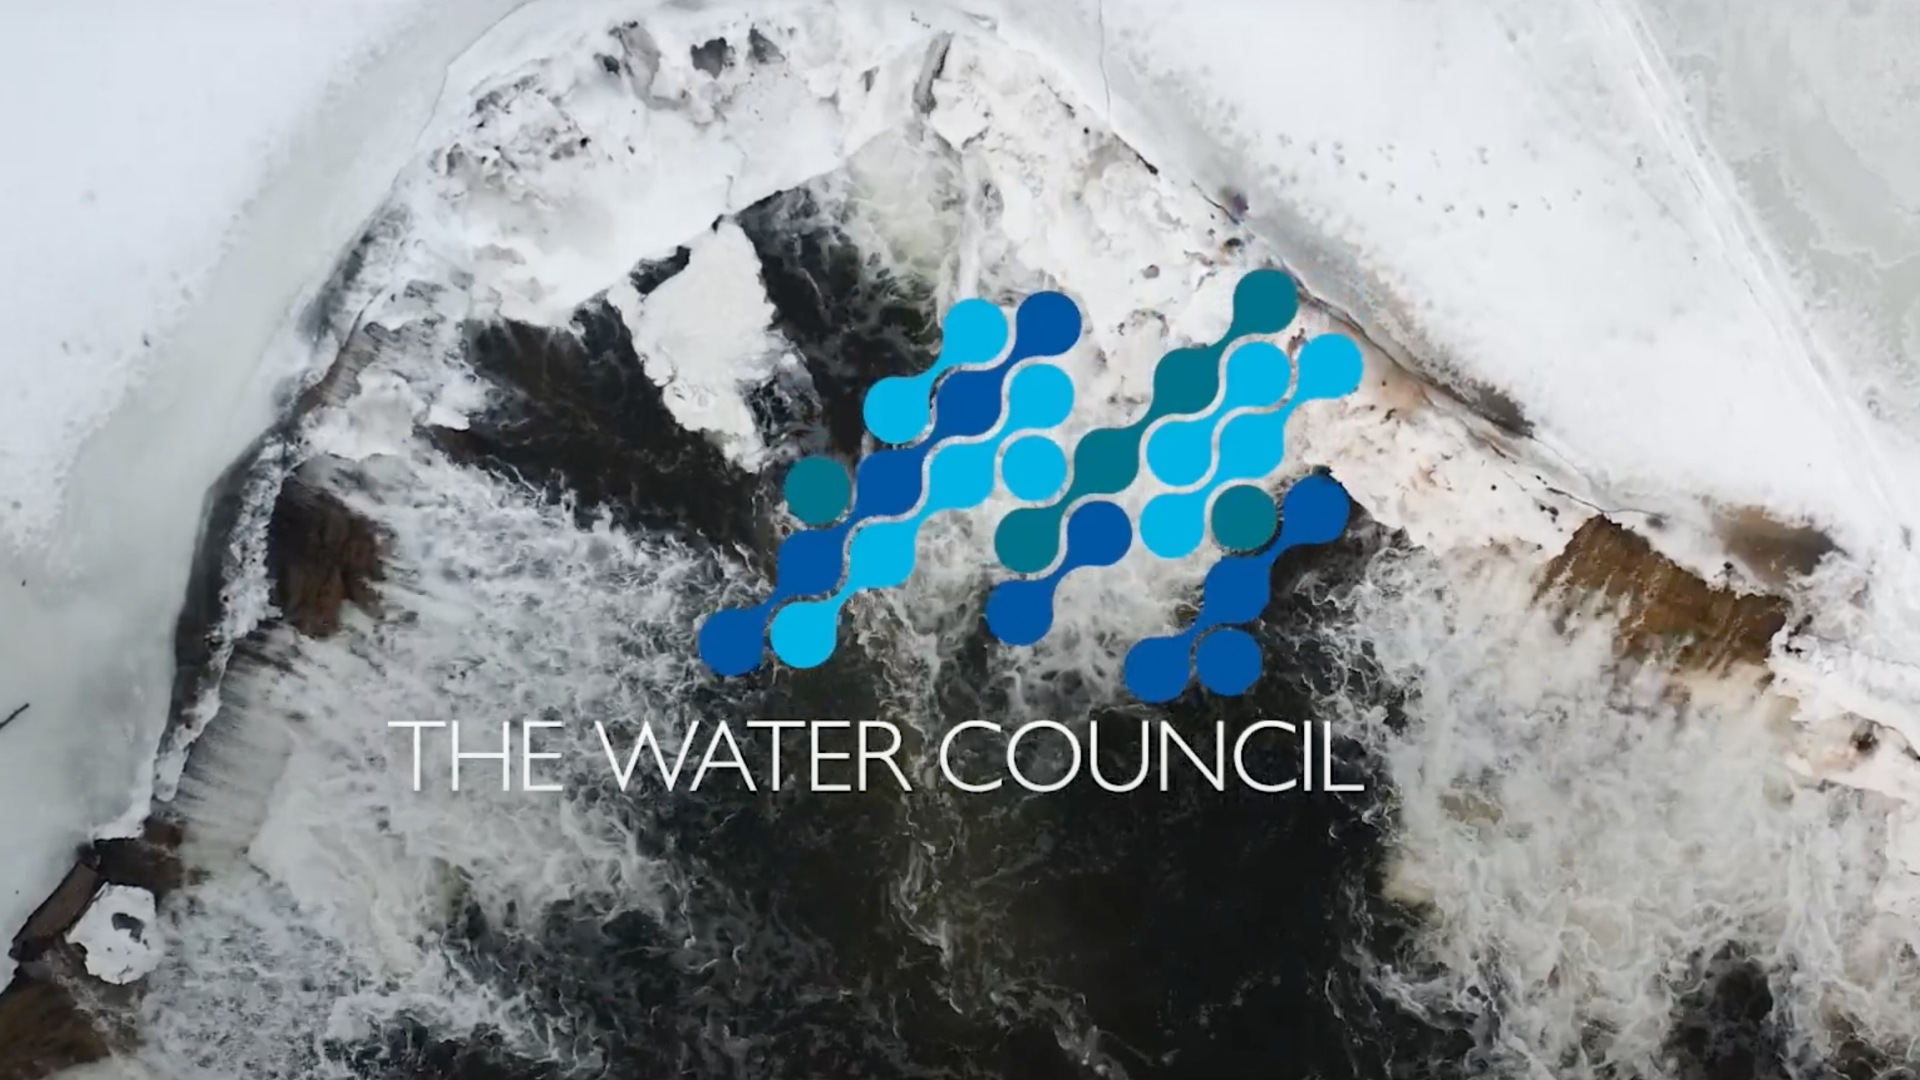 A water fall in winter shot from above by a drone with The Water Councils logo overlayed.